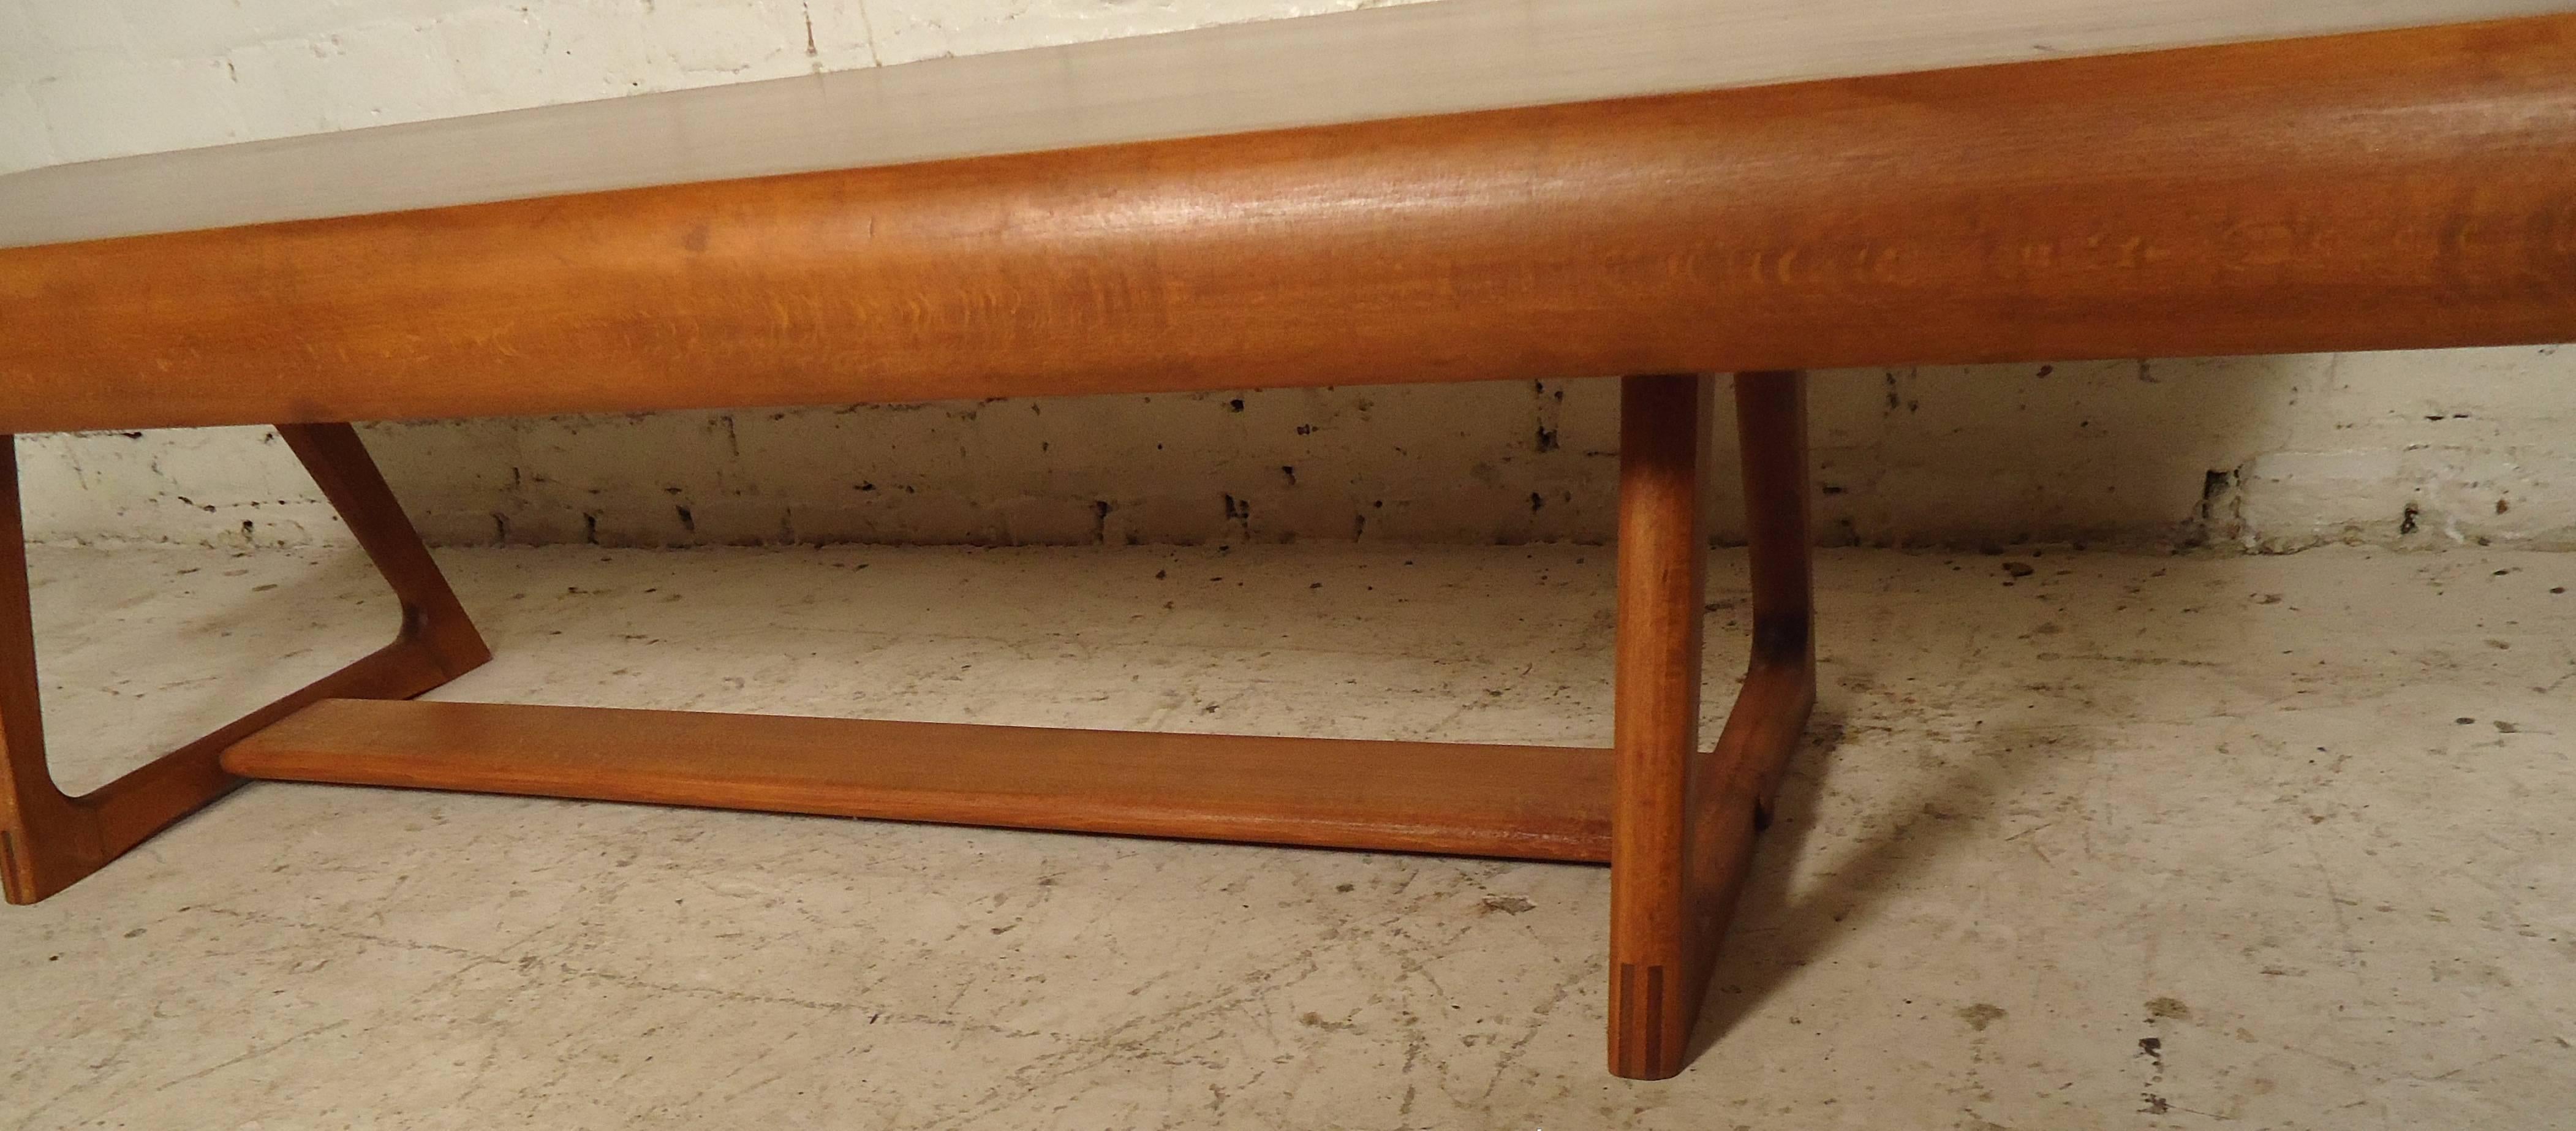 This beautiful vintage modern Yugoslavian coffee table is very rare.
The rich wood grain and odd shaped legs makes this table one of a kind.

(Please confirm item location - NY or NJ - with dealer).